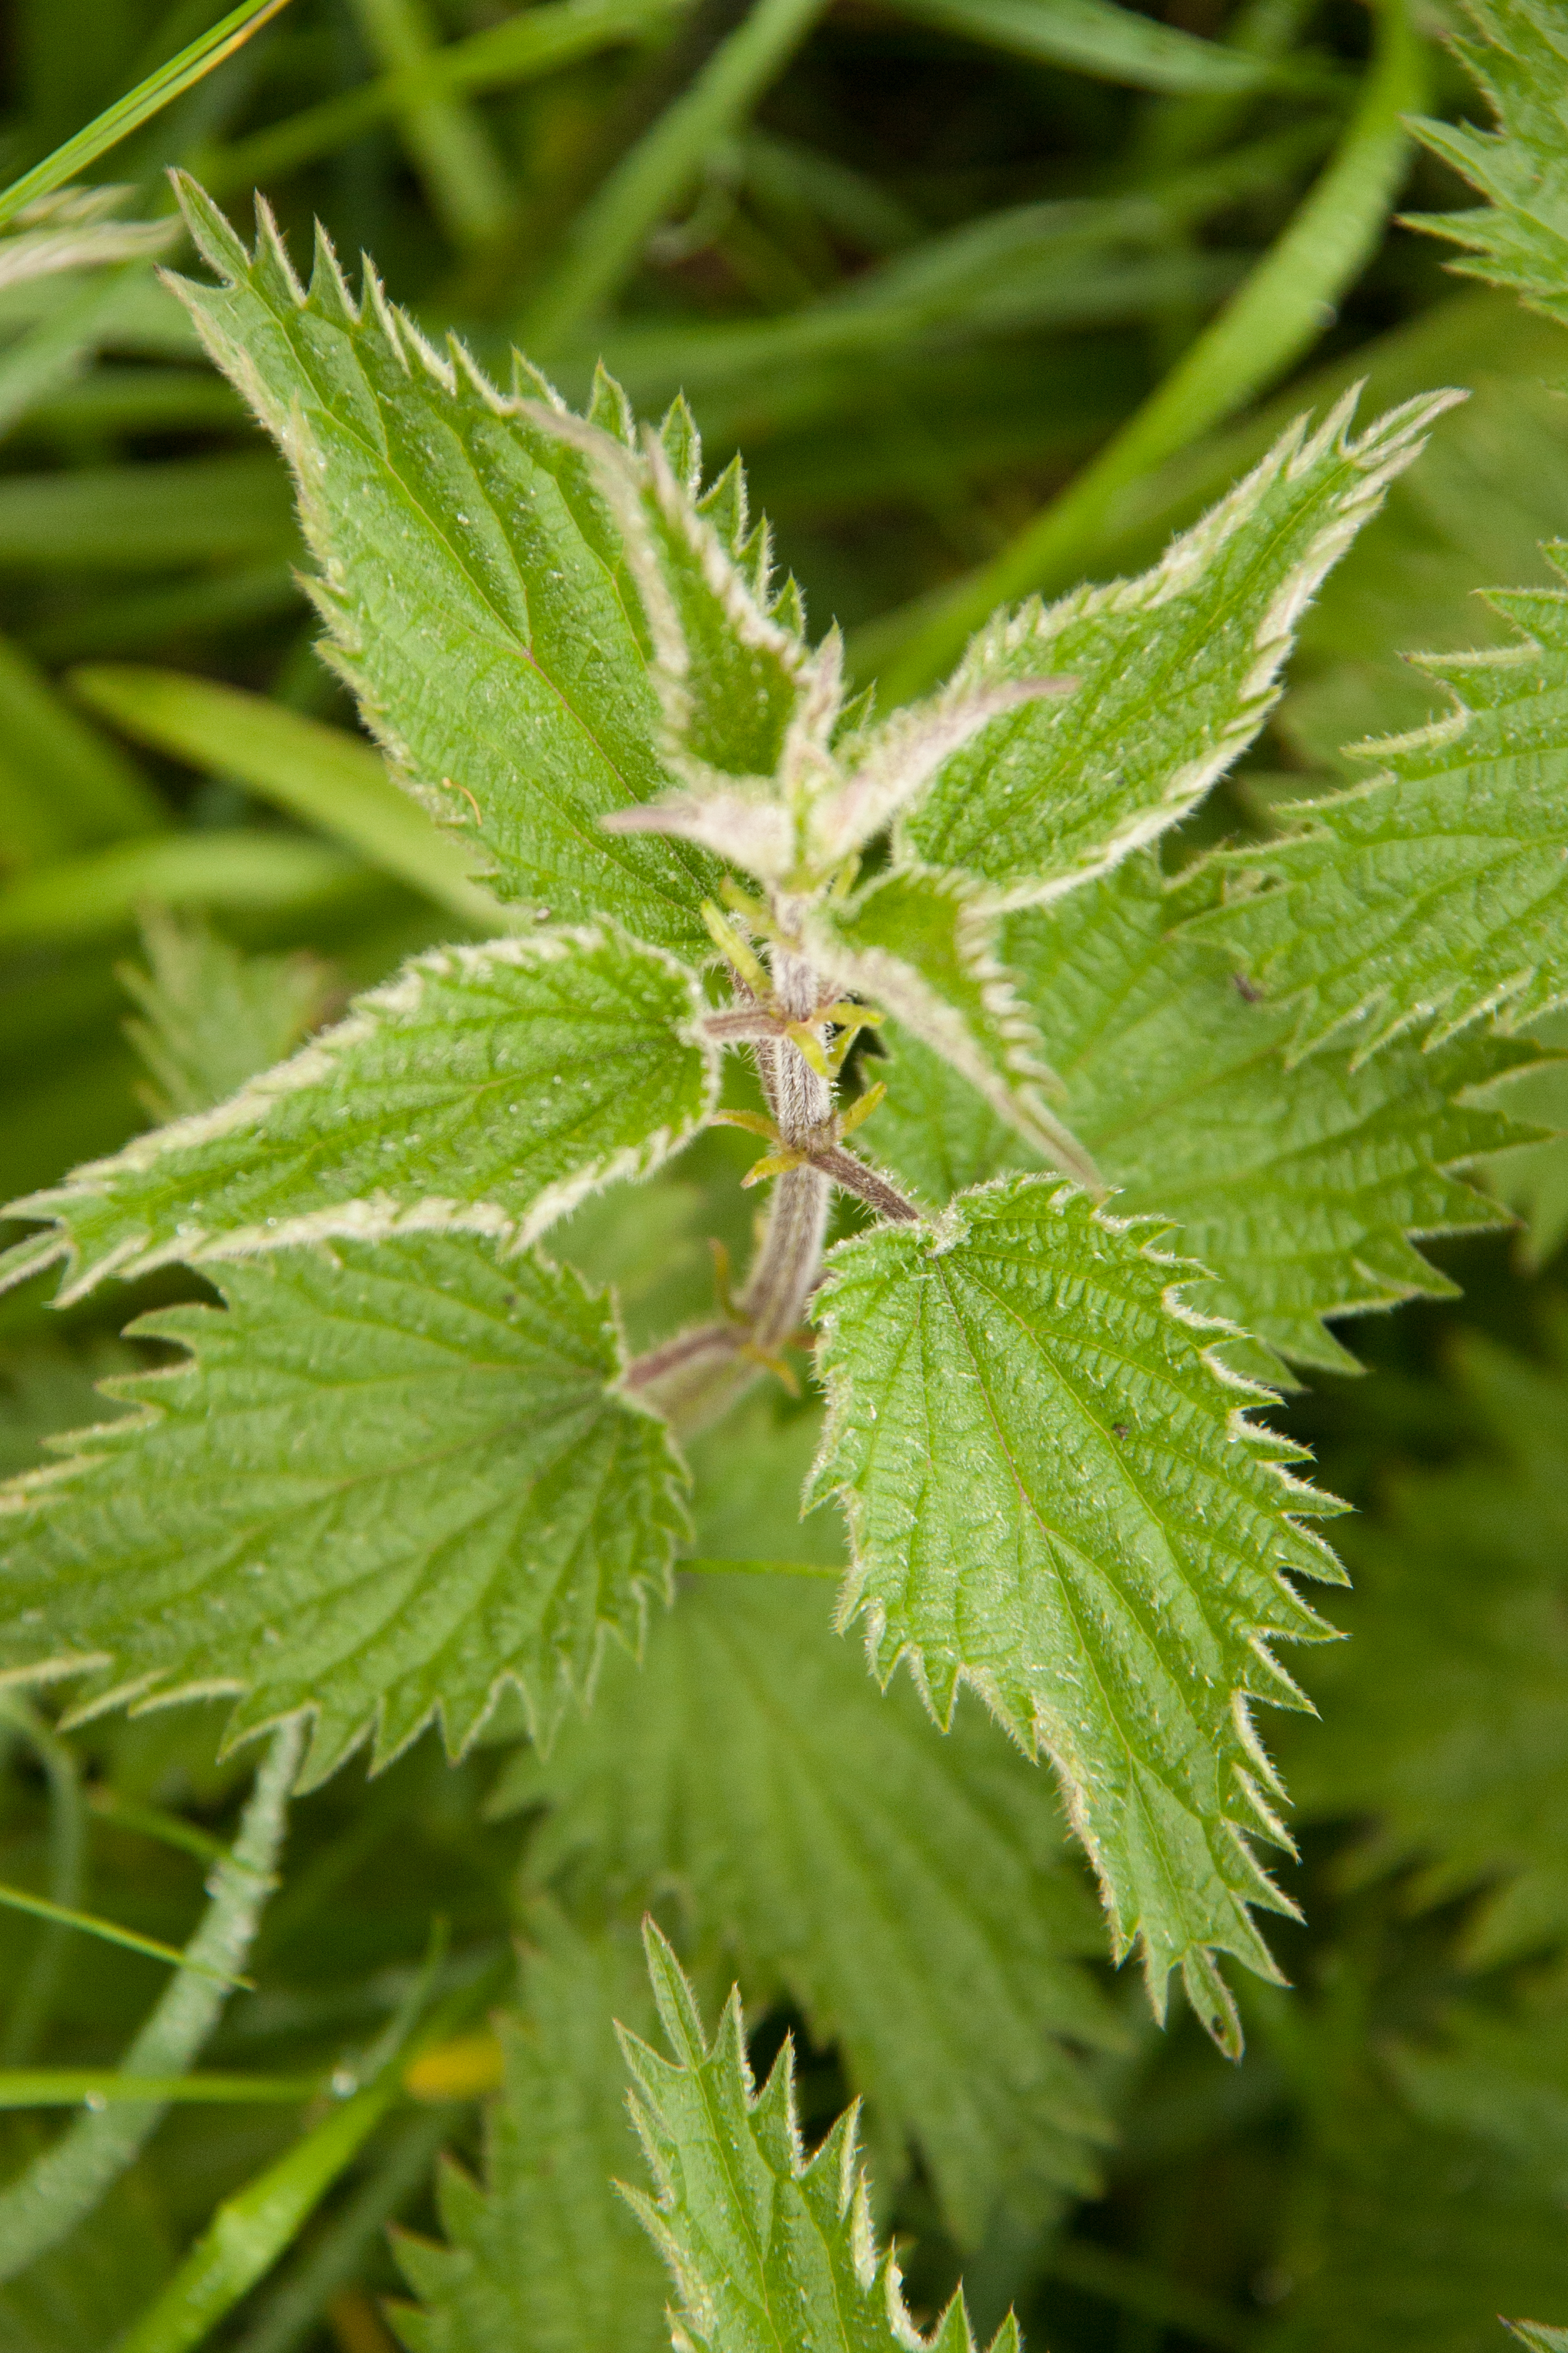 All About Stinging Nettles